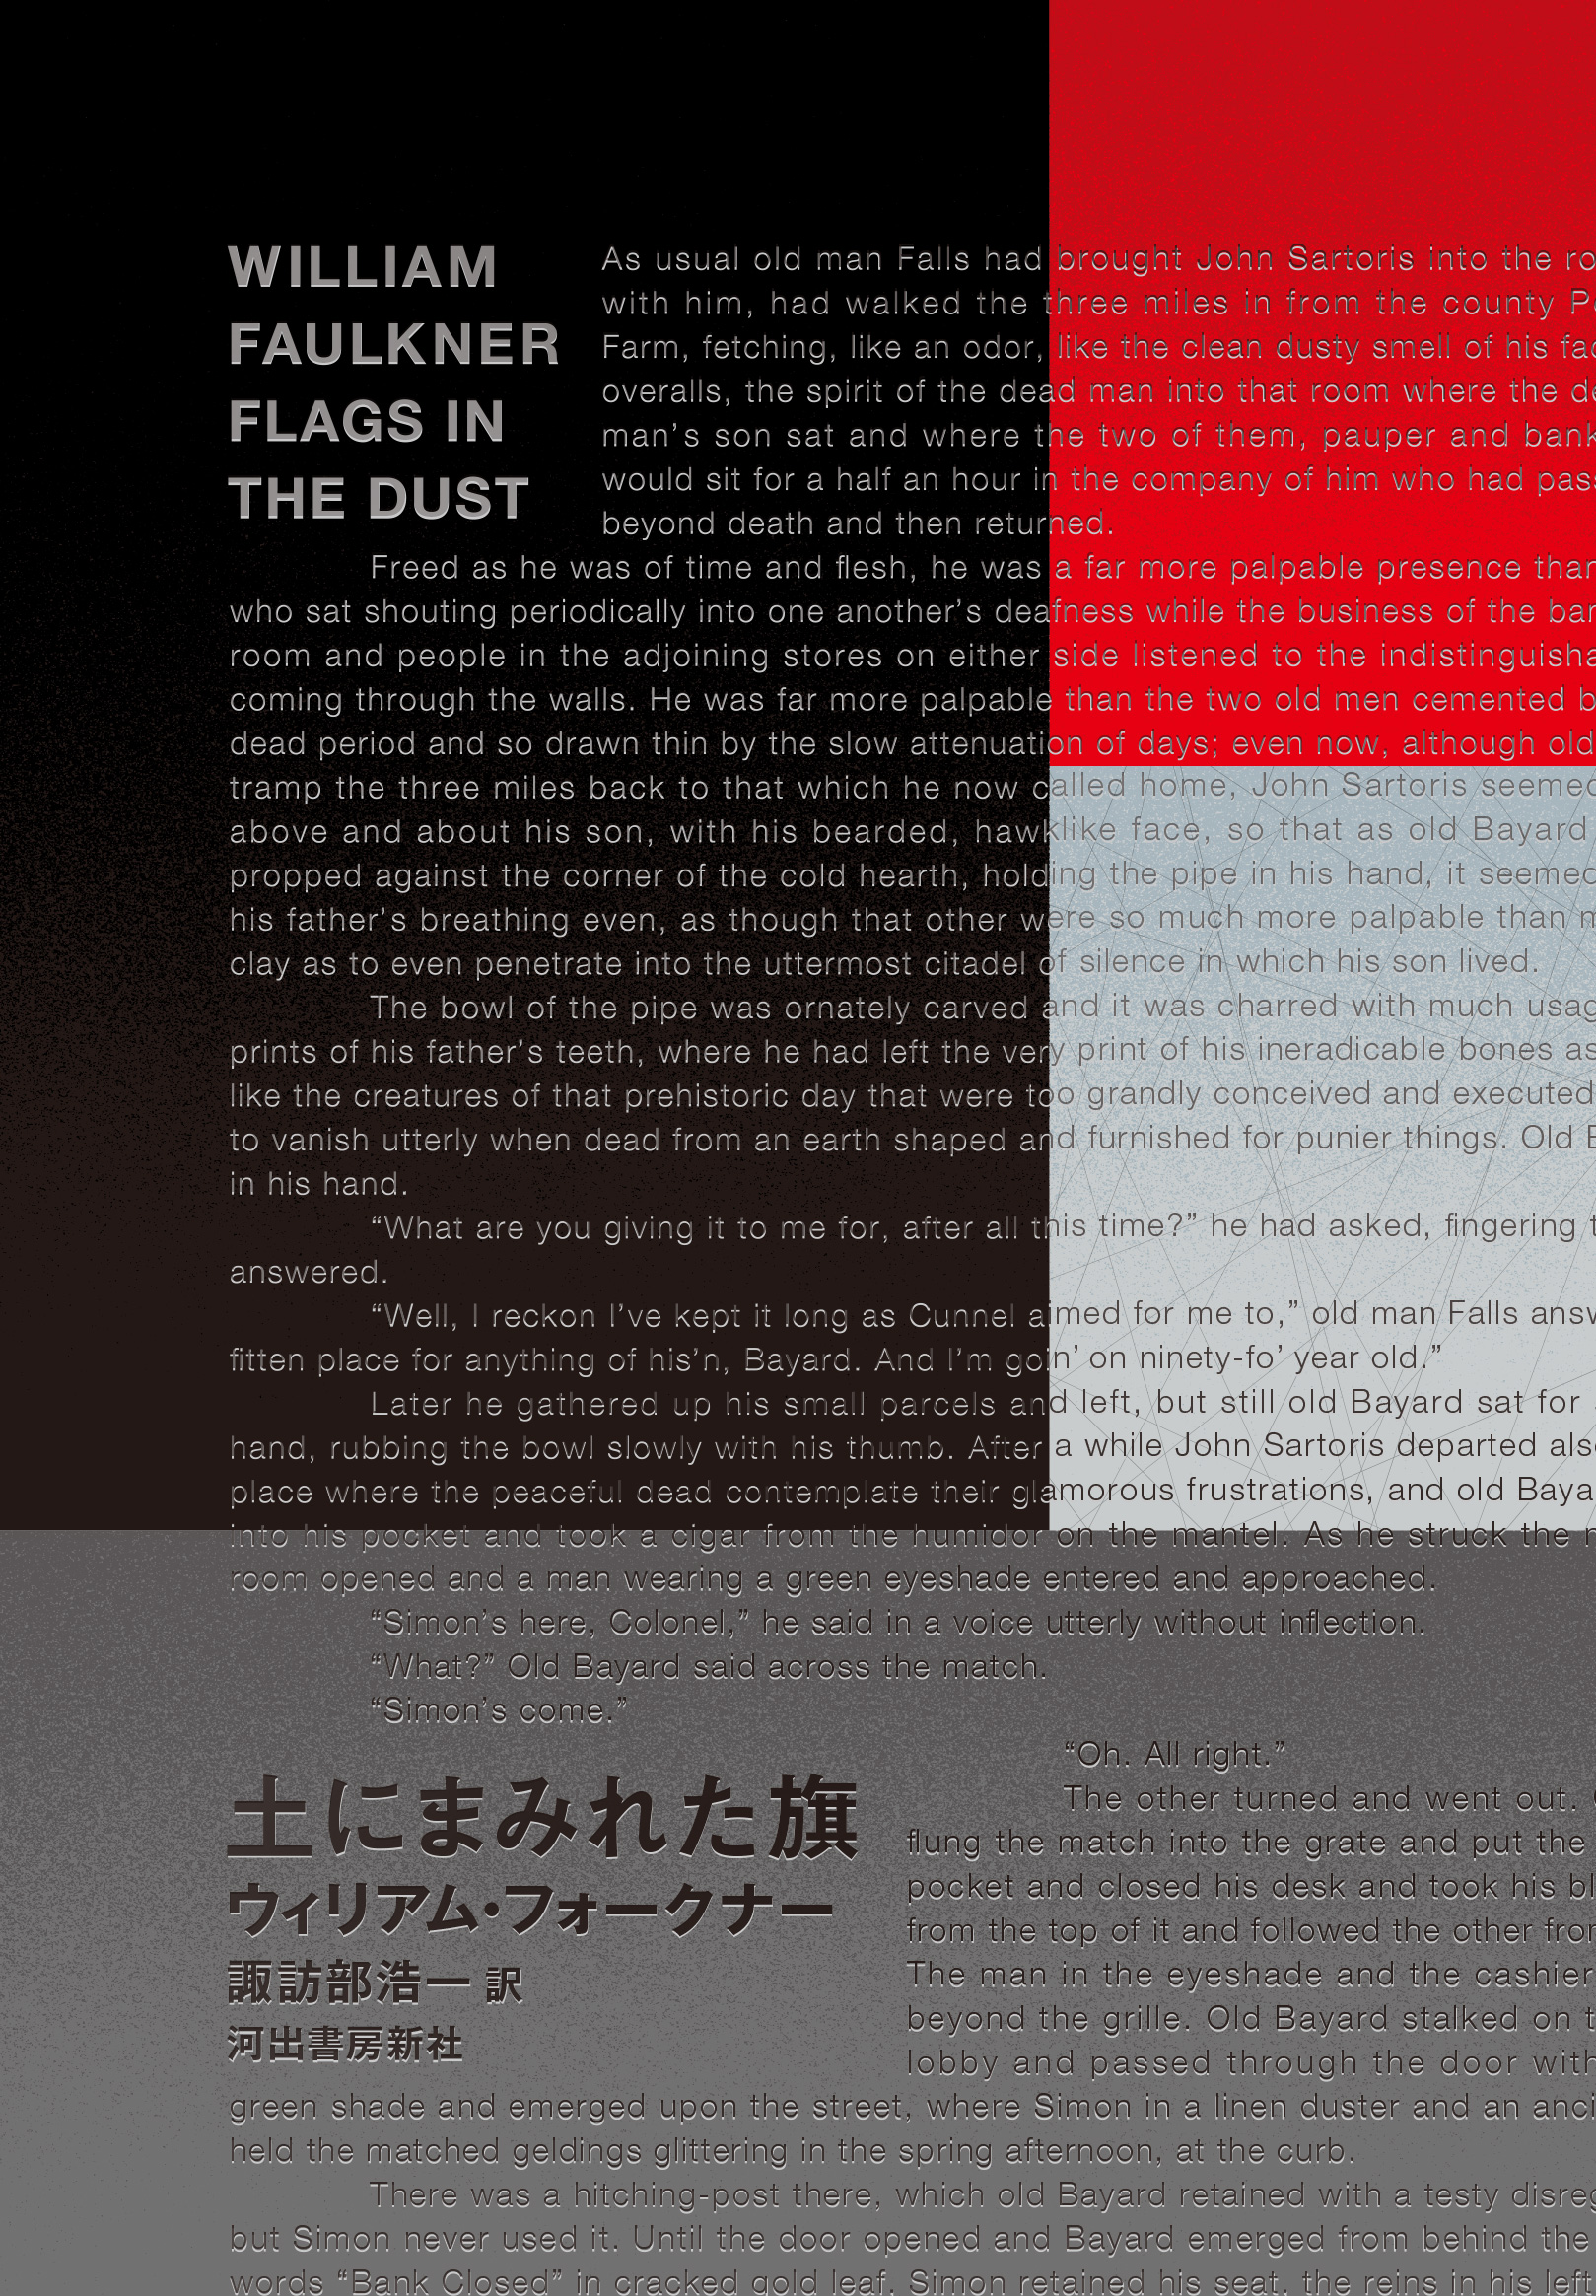 Letters of beginning of the novel, written on the cover designed by black, red, pale gray and dark gray rectangles